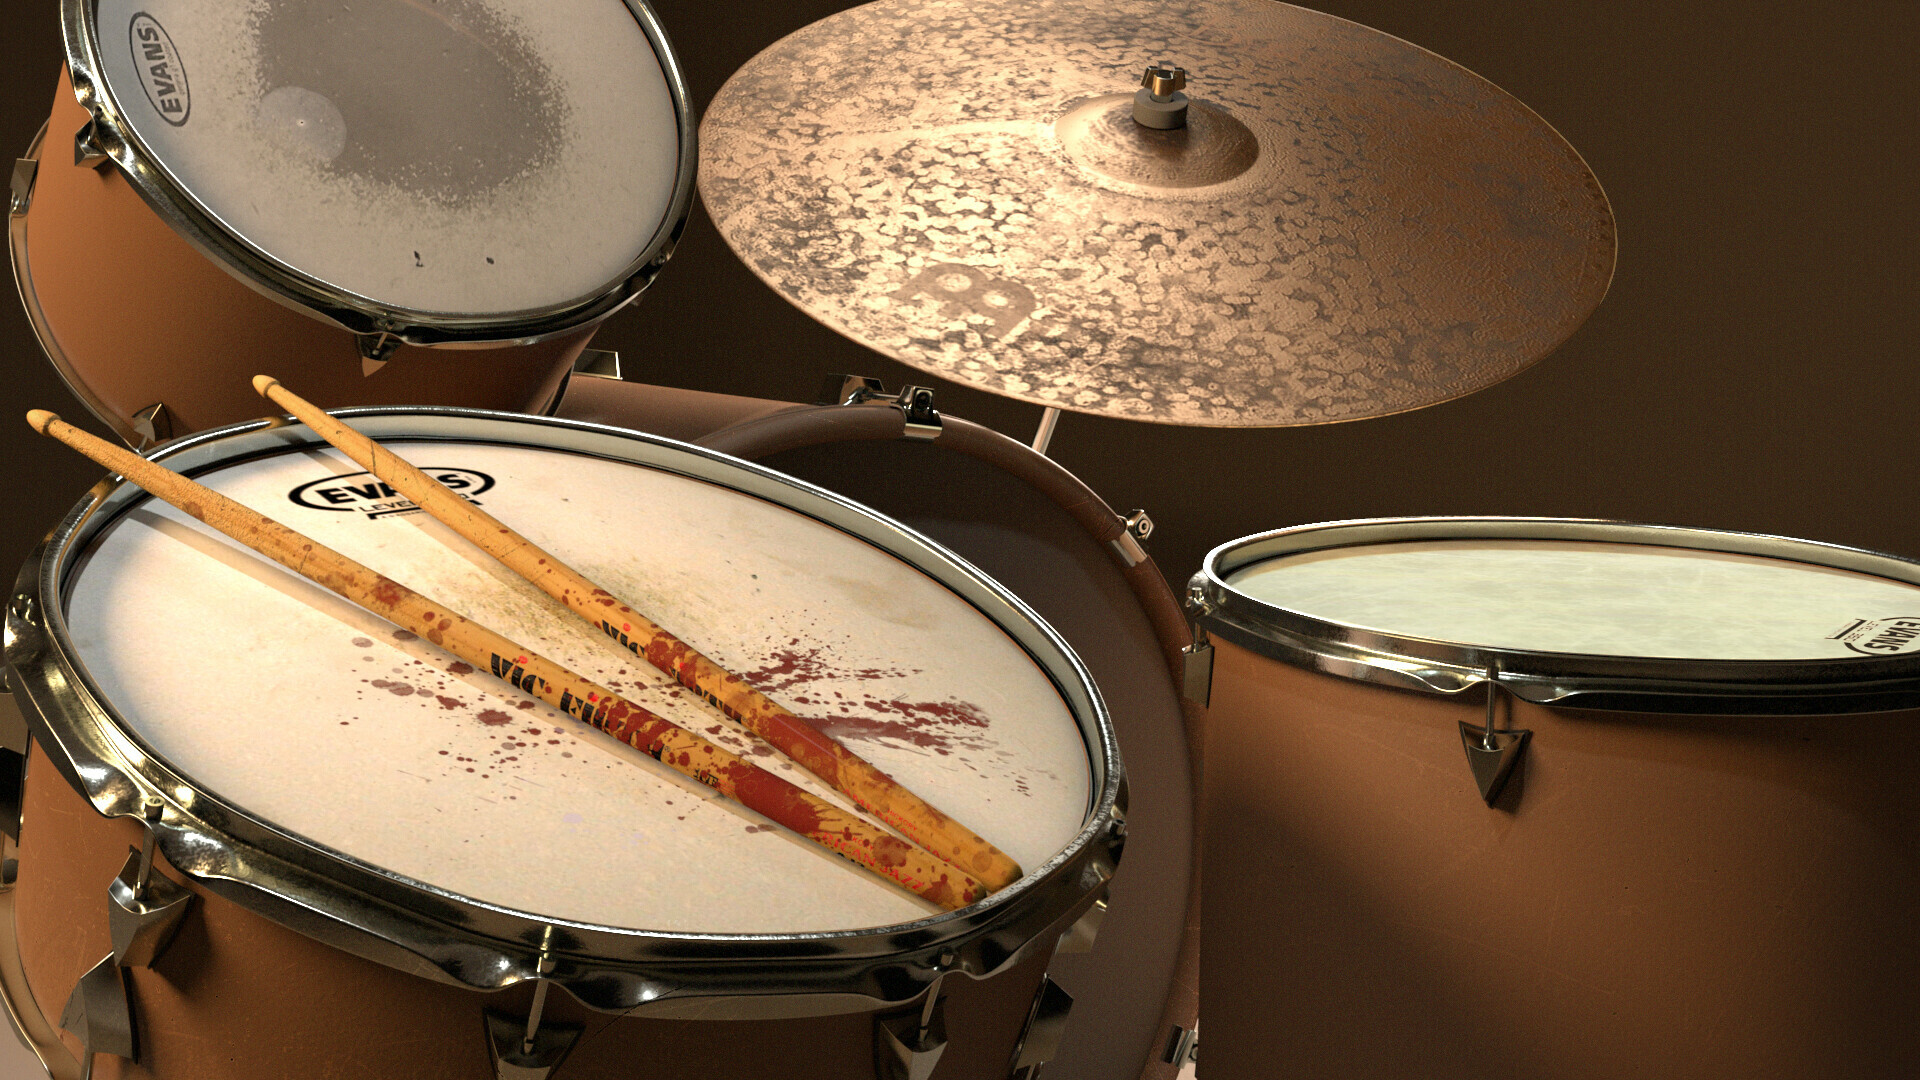 Whiplash: Received nomination for The Academy Award for Best Picture in 2015. 1920x1080 Full HD Wallpaper.